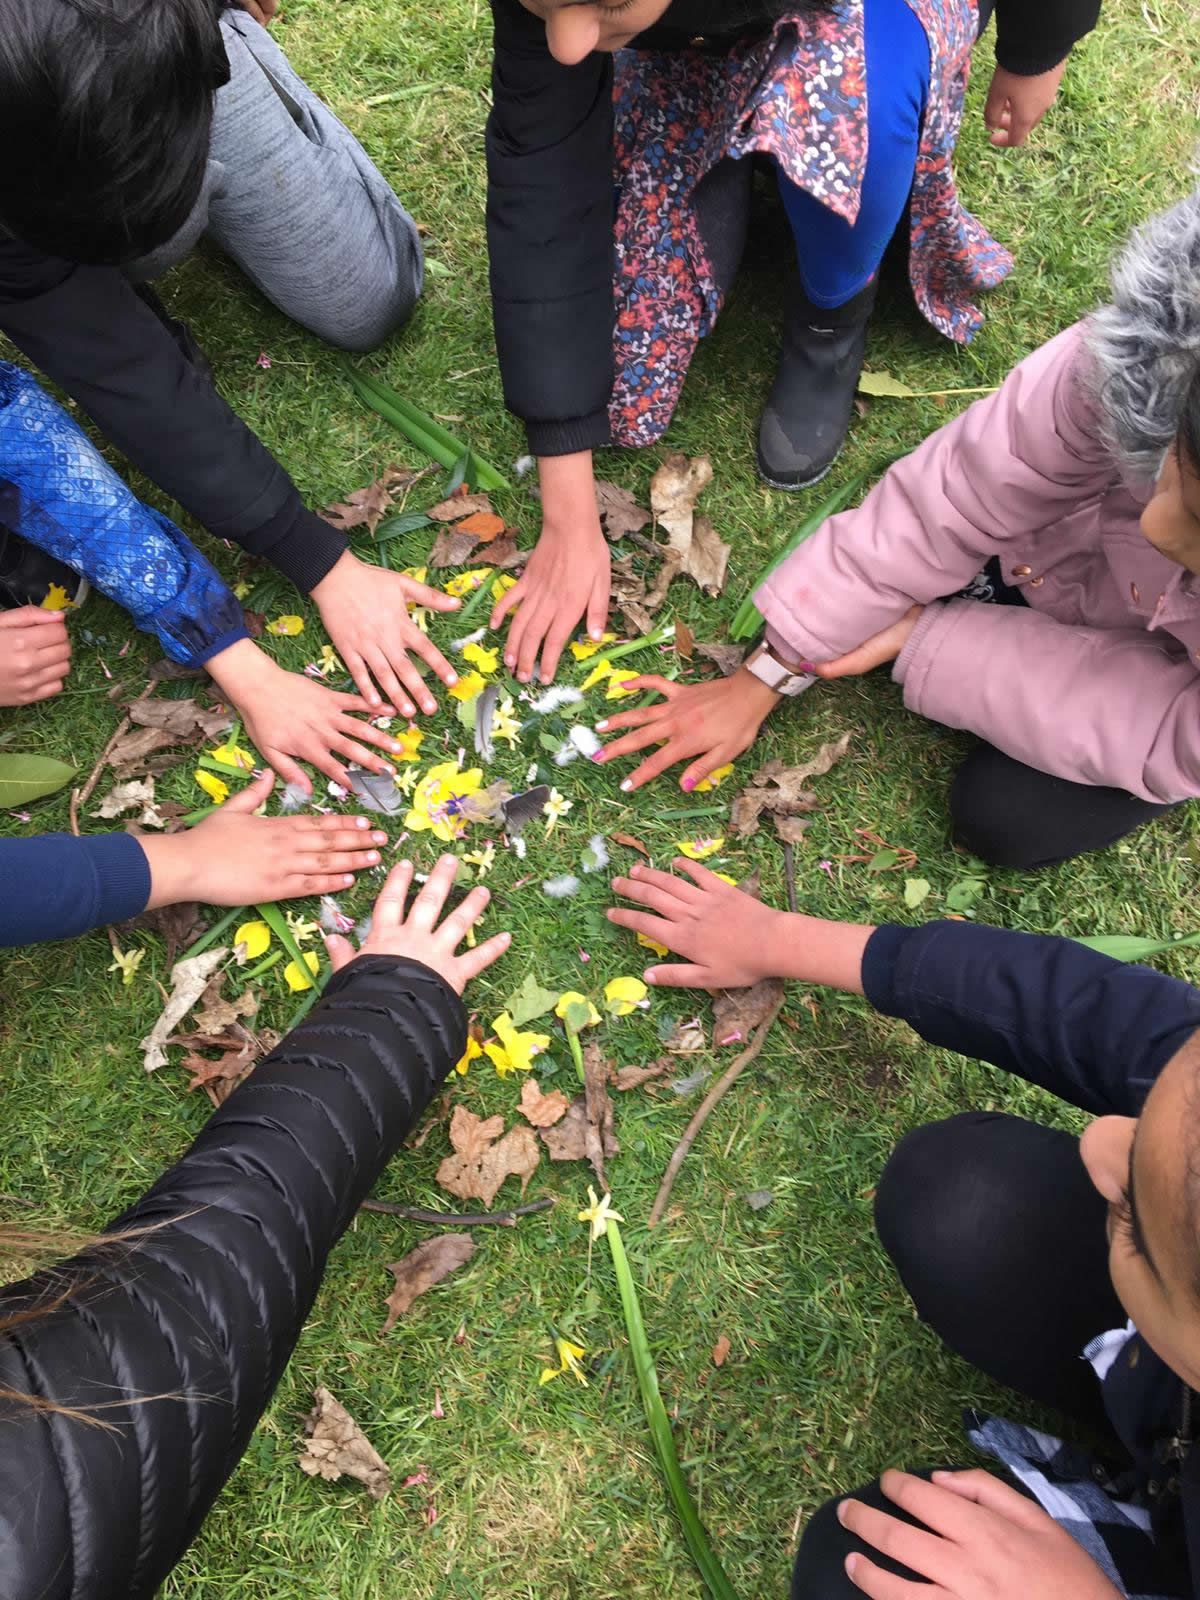 Children's hands amongst leaves and petals